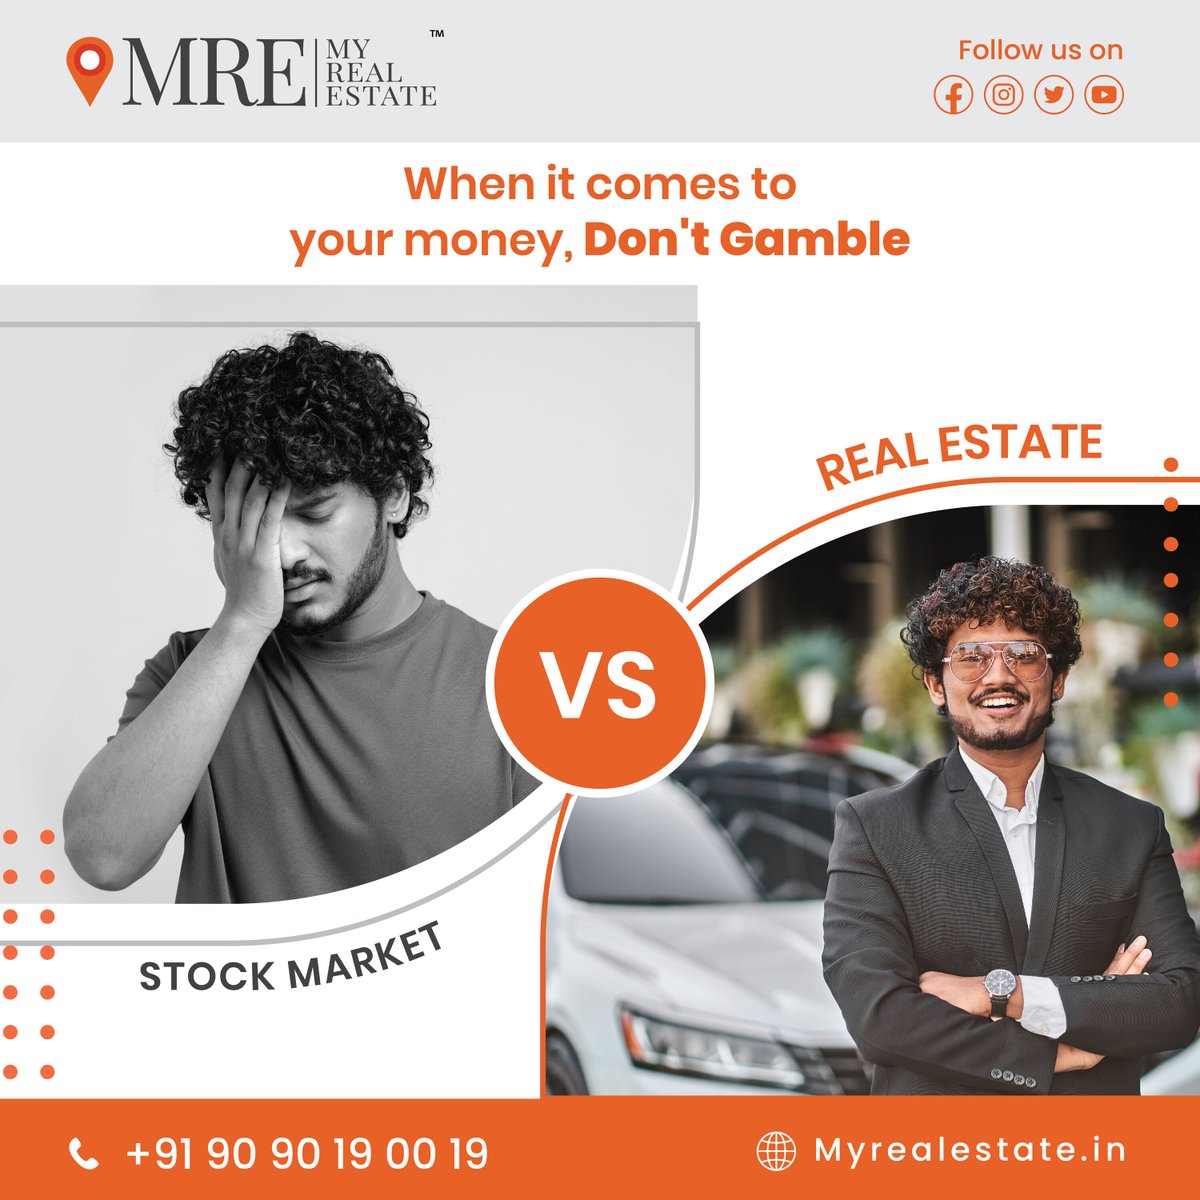 #InvestmentTip: Long-term investments are always safer than short-term ones. When it comes to your #money, don't gamble. #MRE #Myrealestate #realestateisbest #realasset